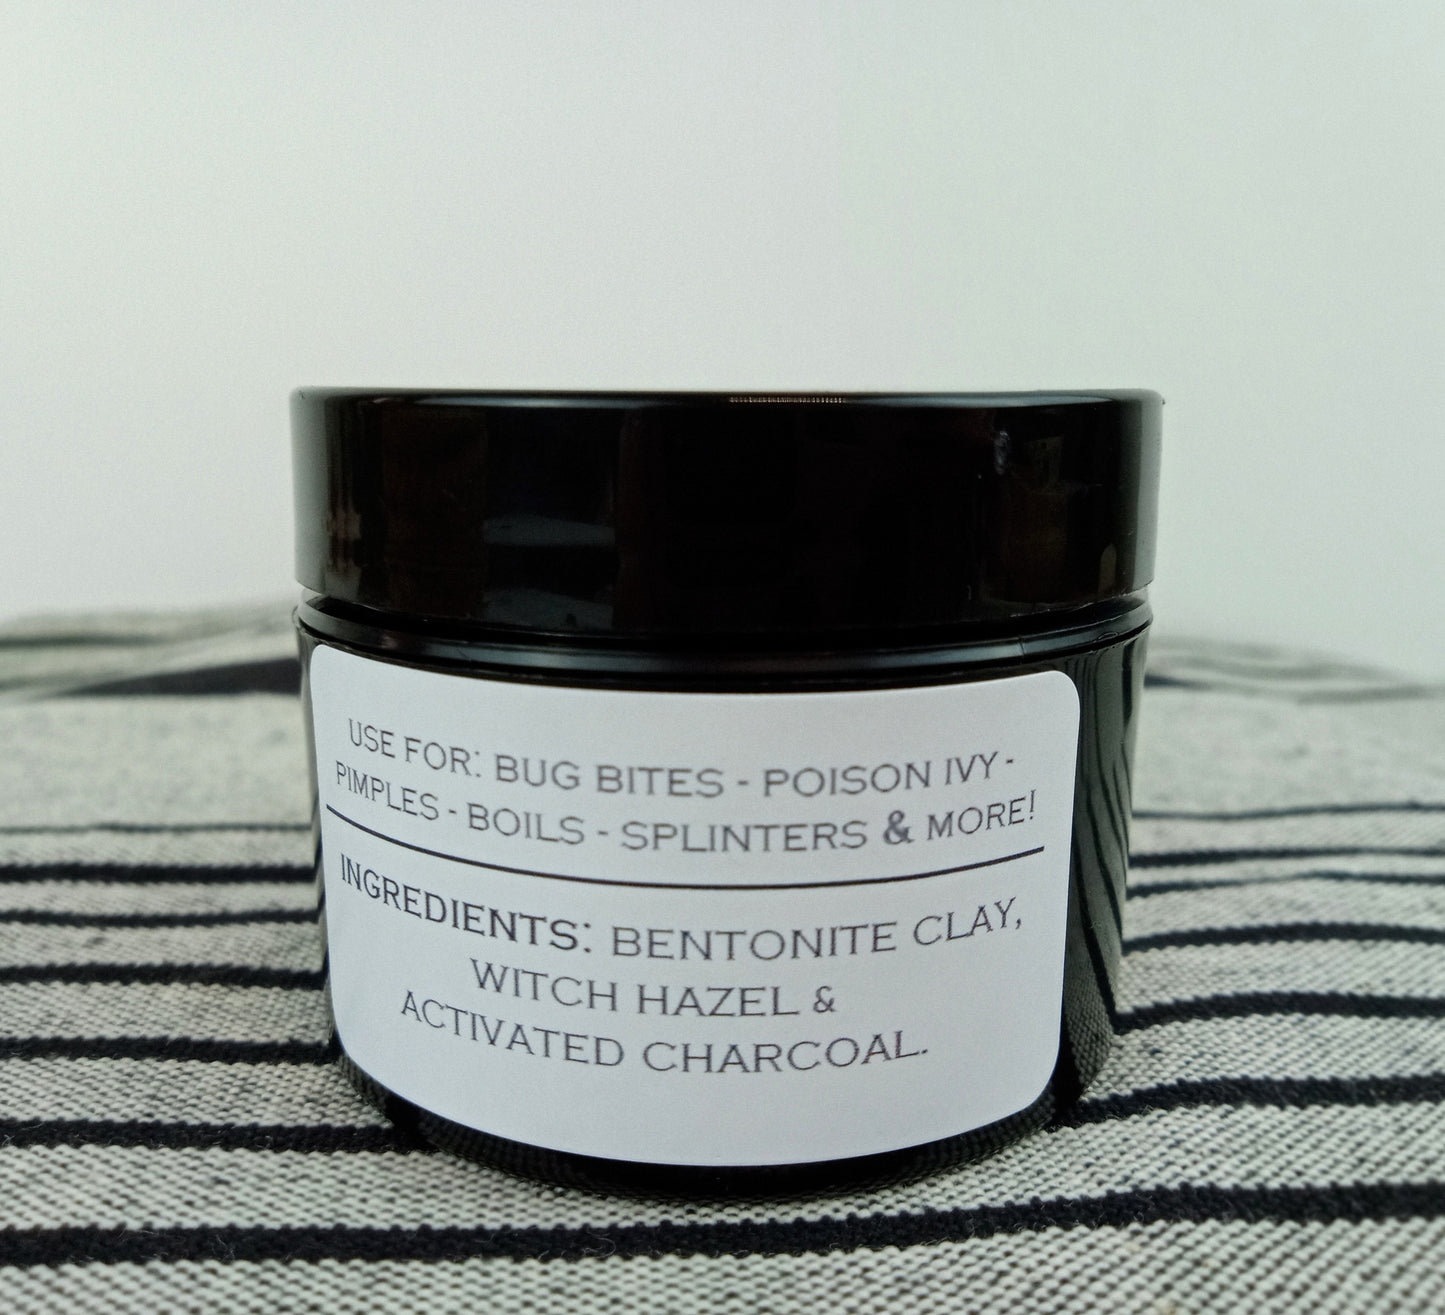 DETOX CLAY - BENTONITE CLAY WITH WITCH HAZEL - FOR: BUG BITES - POISON IVY // RASHES & MORE 2 oz.